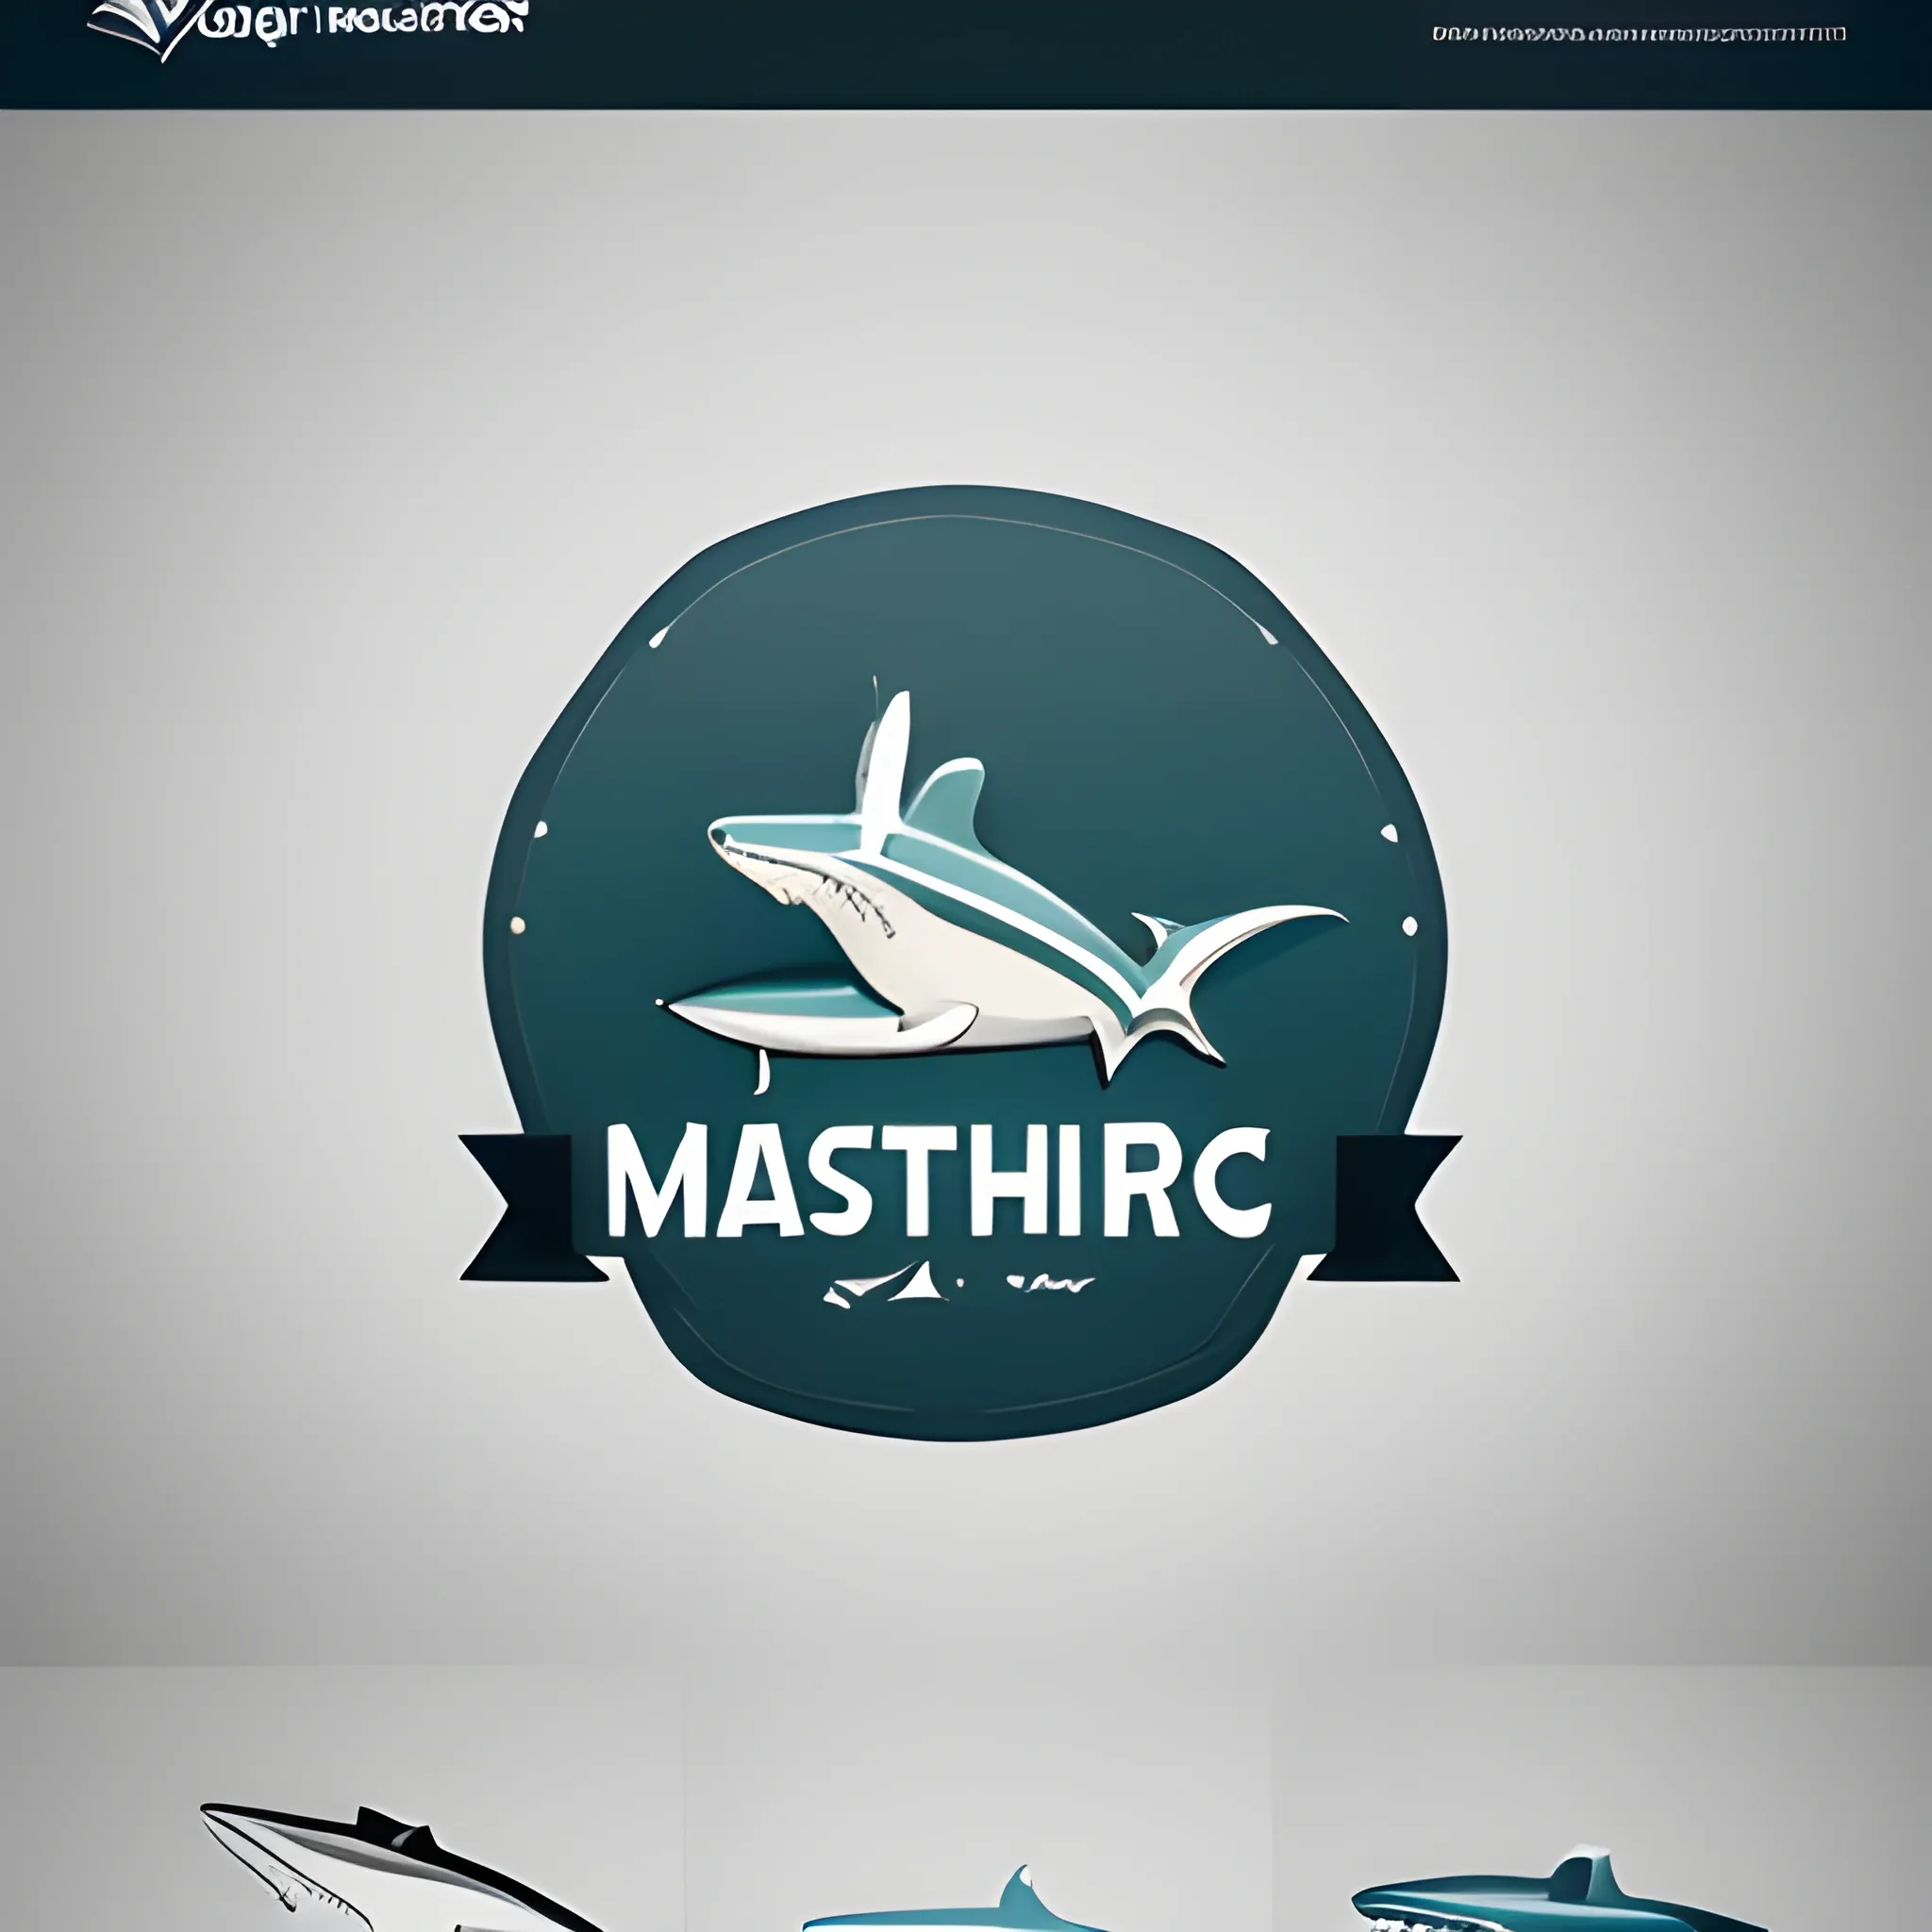 Develop an elegant logo for "Jig Master" featuring a refined representation of a shark and a fishing hook. Aim for a design that exudes sophistication and style. Place the store name below the image in a tasteful font. Choose a muted and classy color palette to convey a sense of marine elegance.
